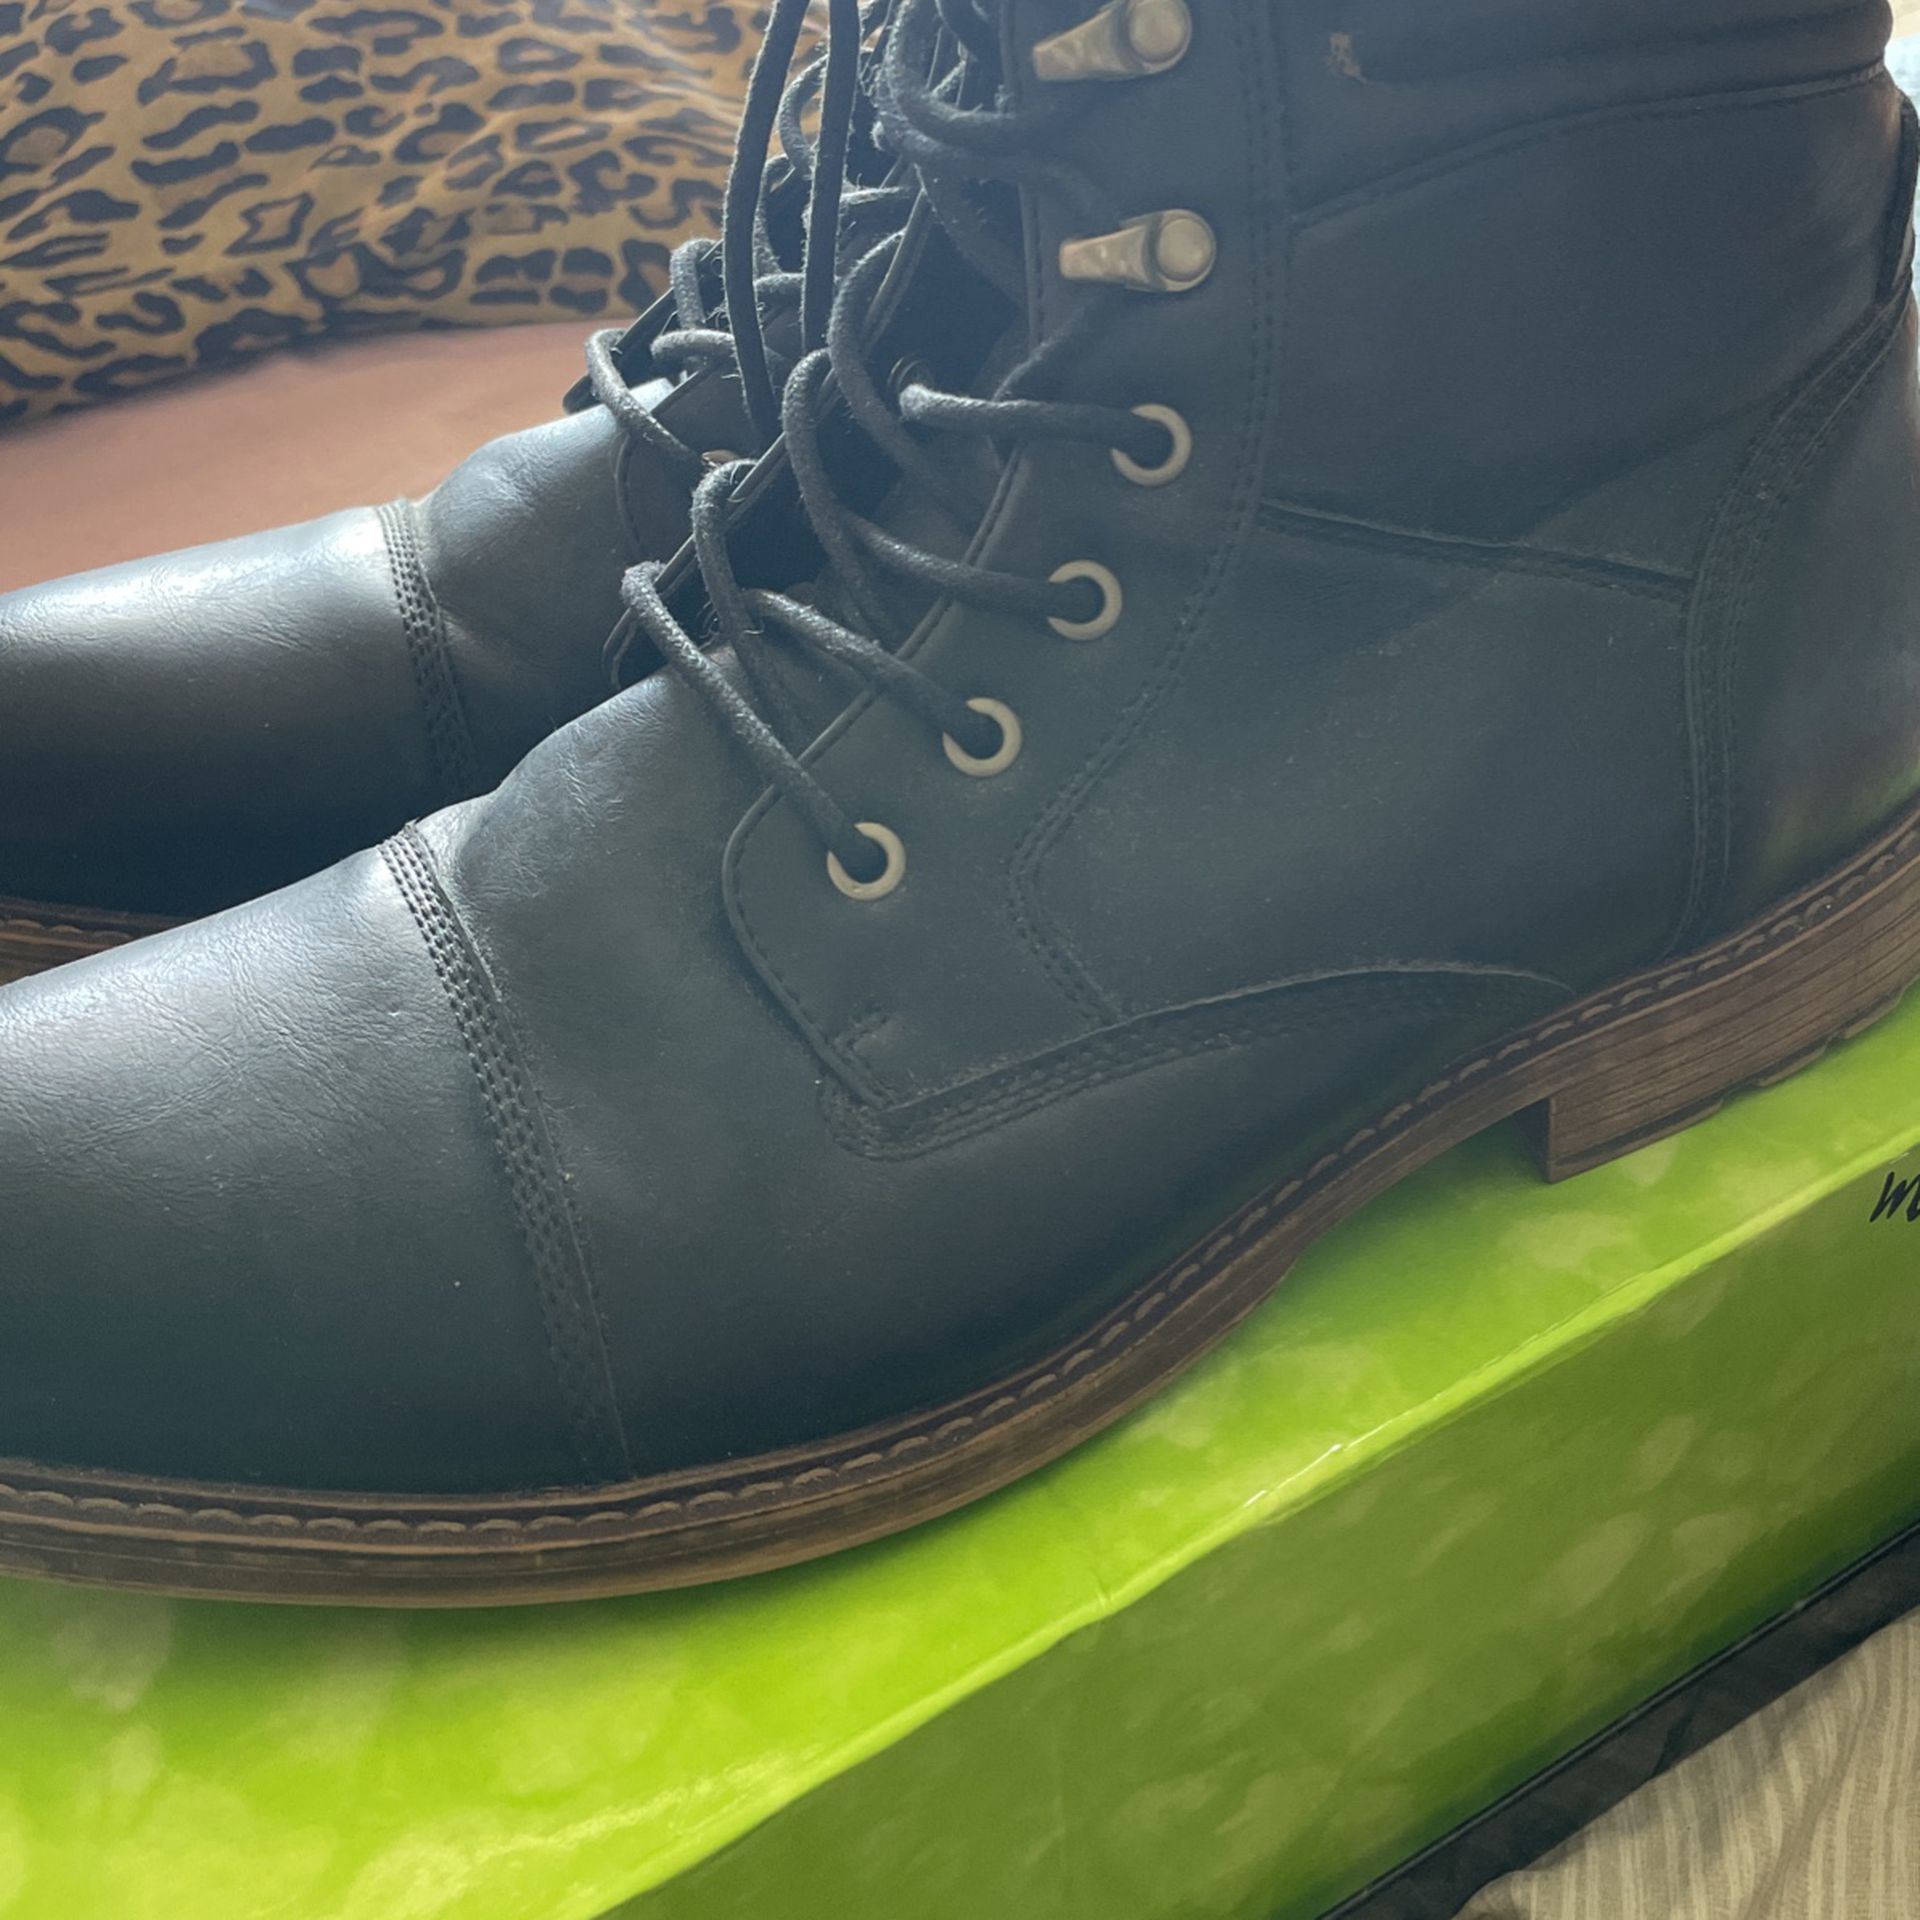 Men’s Boots Brand New Condition Size For $40